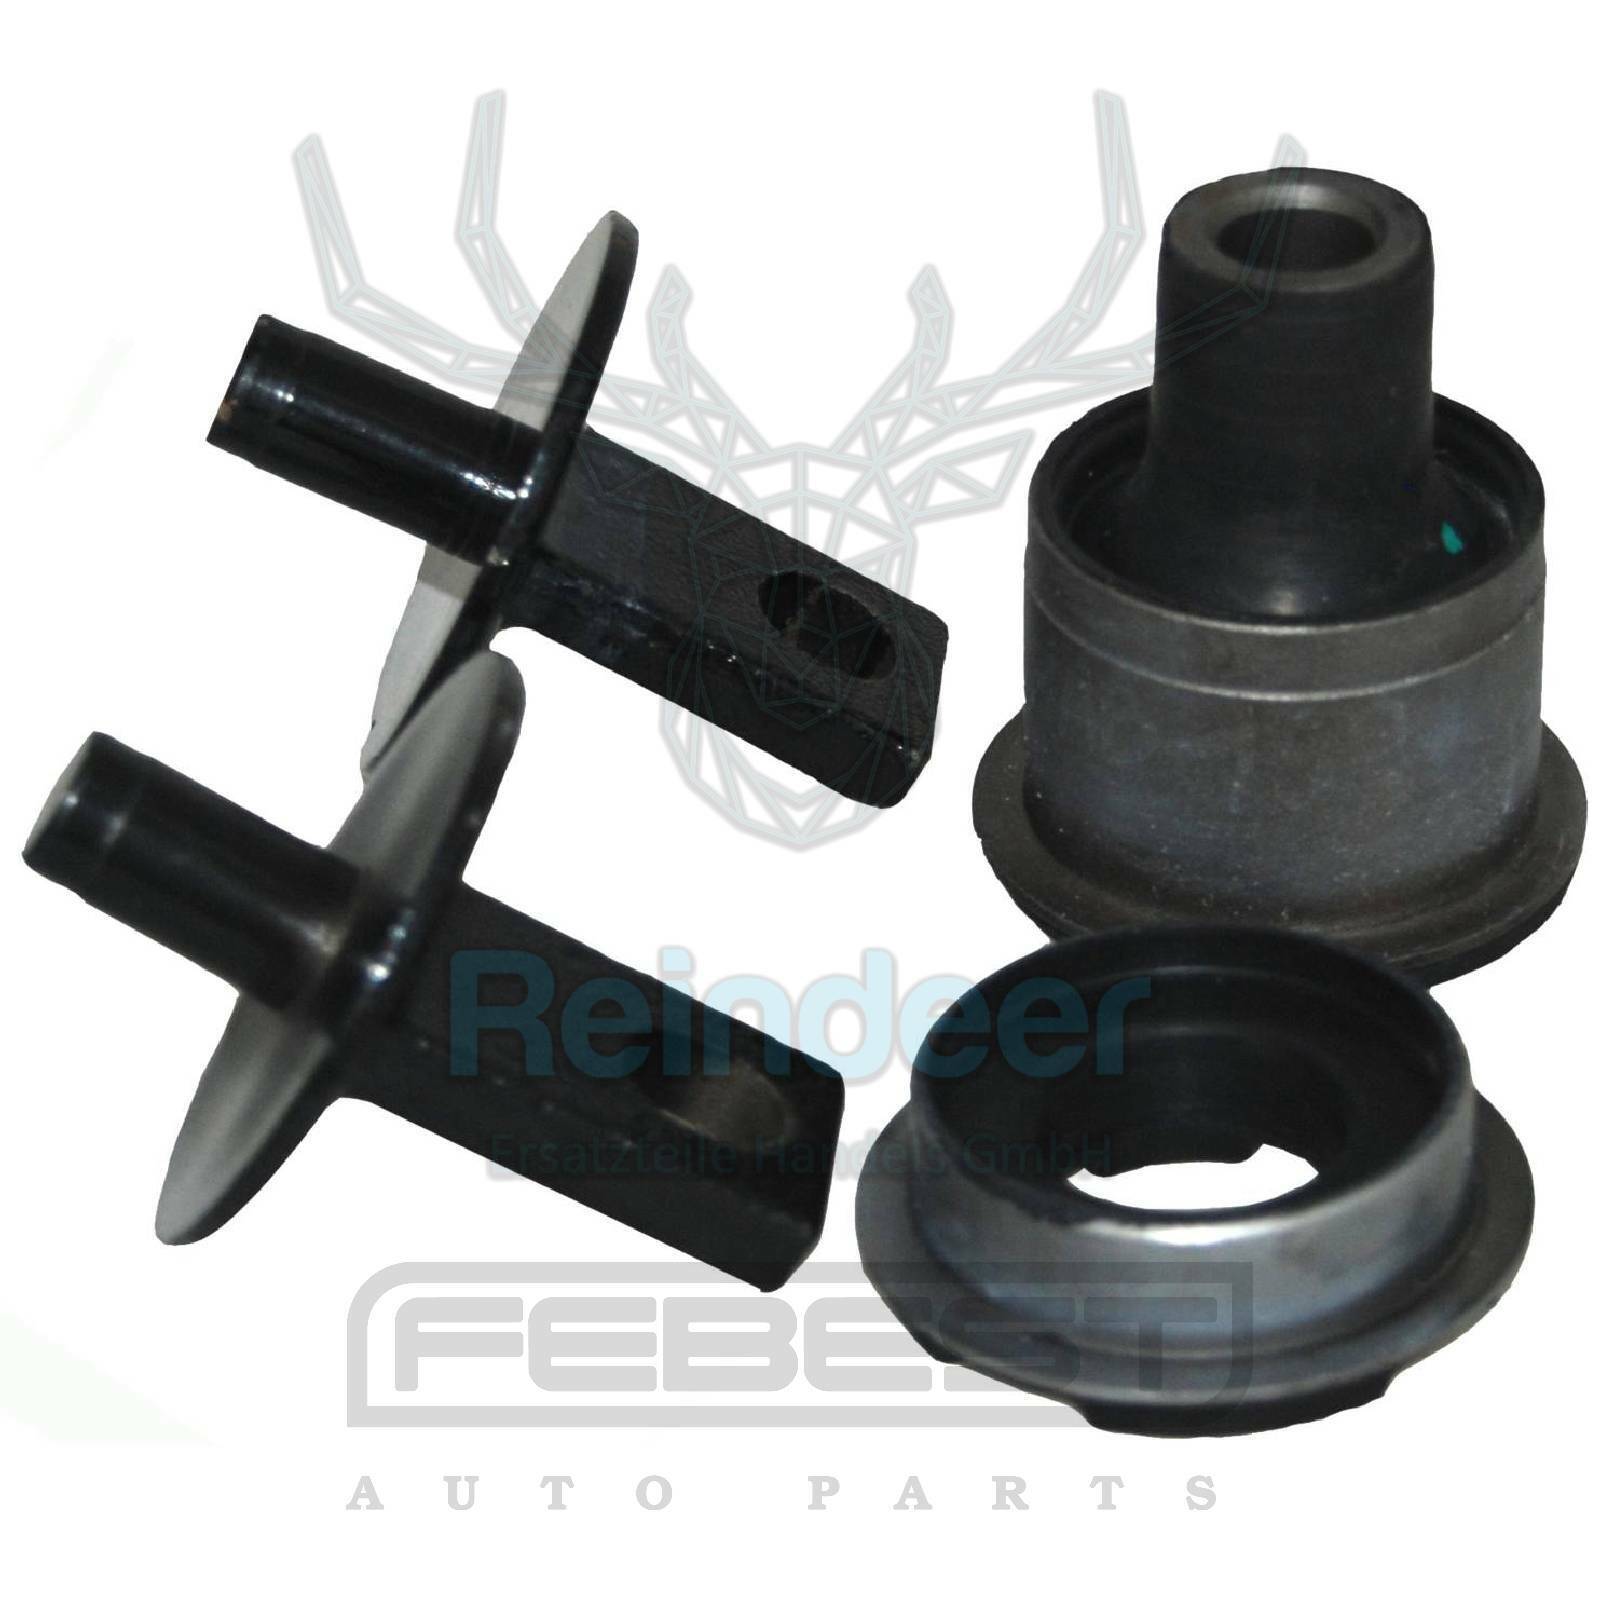 Details about   Rear Arm Bushing Front Arm FEBEST HAB-033 OEM 51350-S2H-G02 